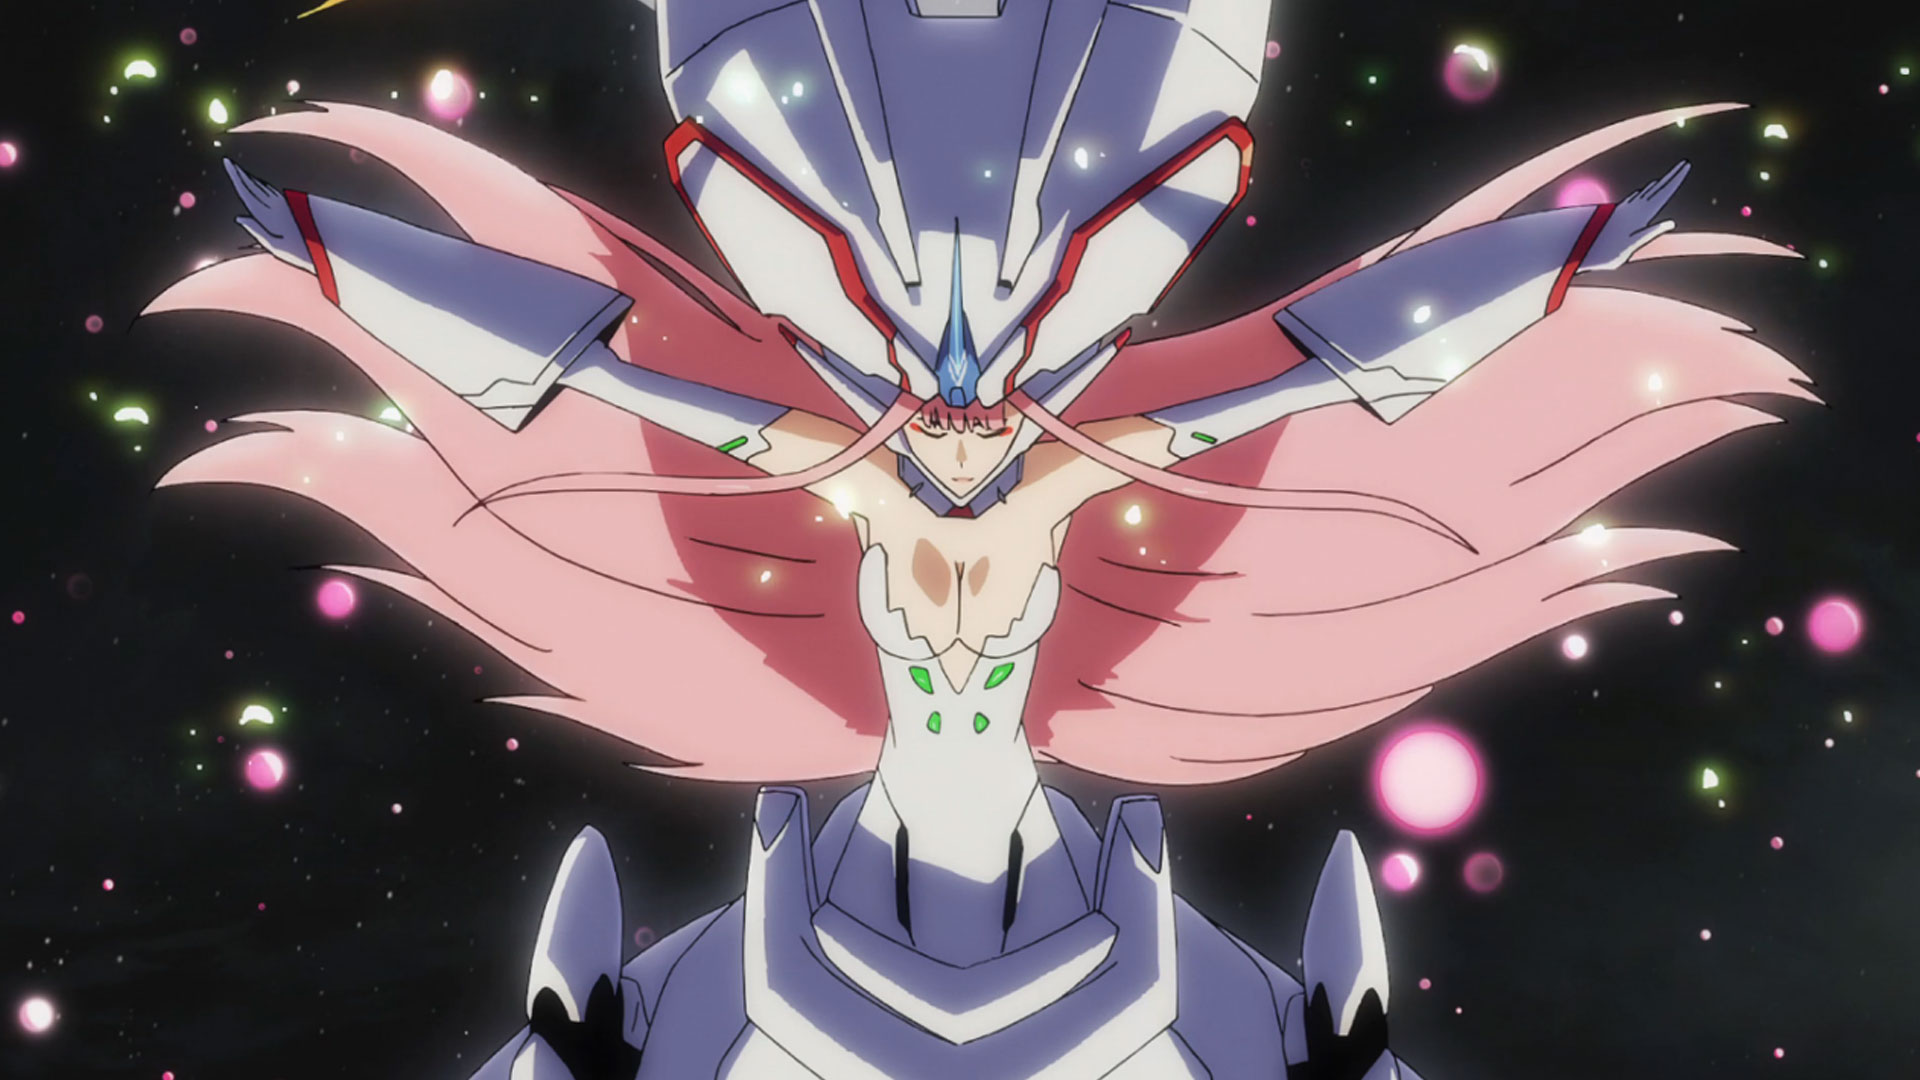 Actually, Darling in the FranXX Wasn't That Bad: Viewers Were Just Unhappy About the Ending